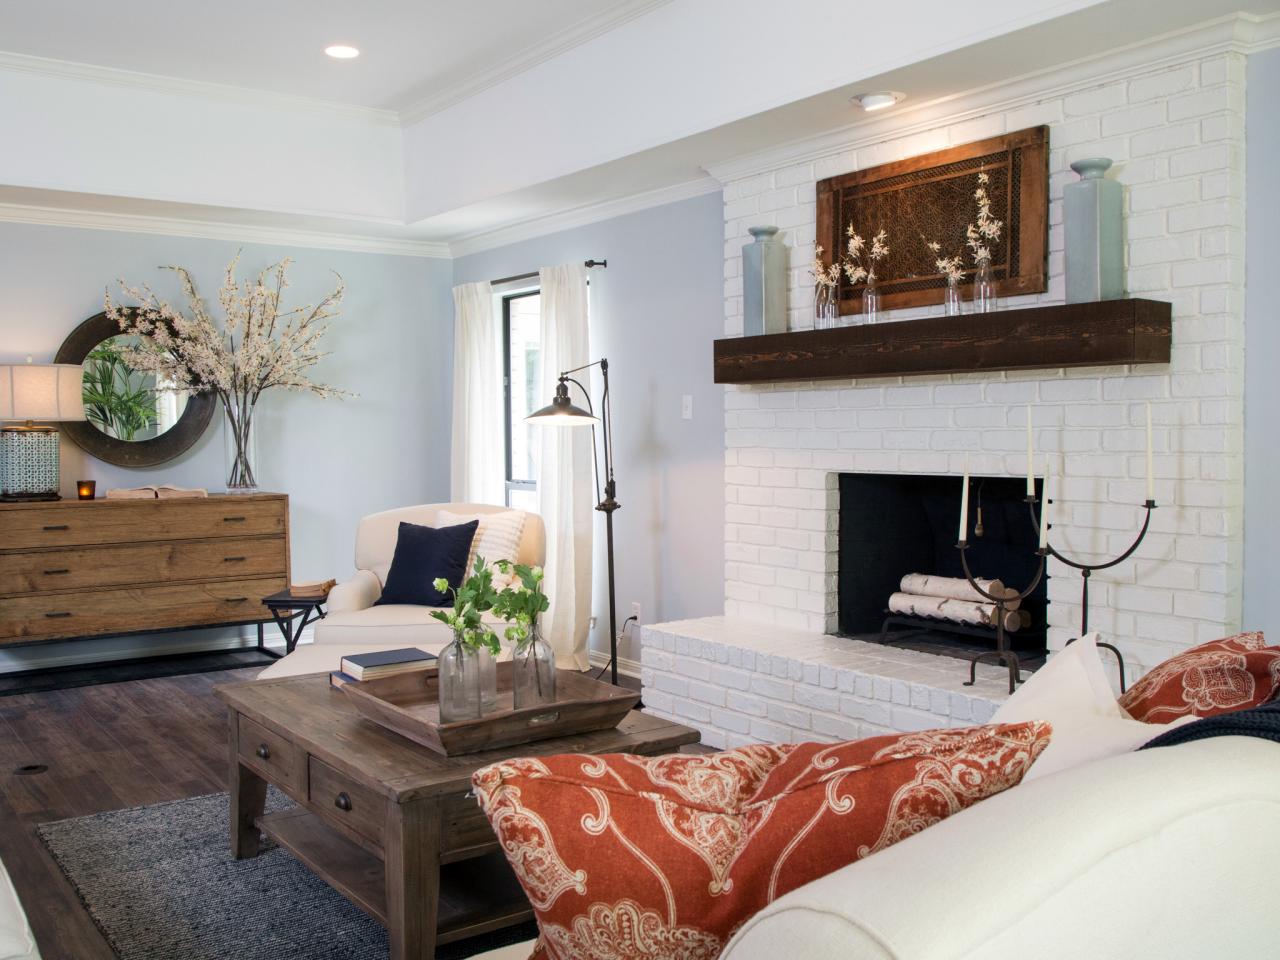 How To Paint A Brick Fireplace White, Painting Brick Fireplace White Before And After